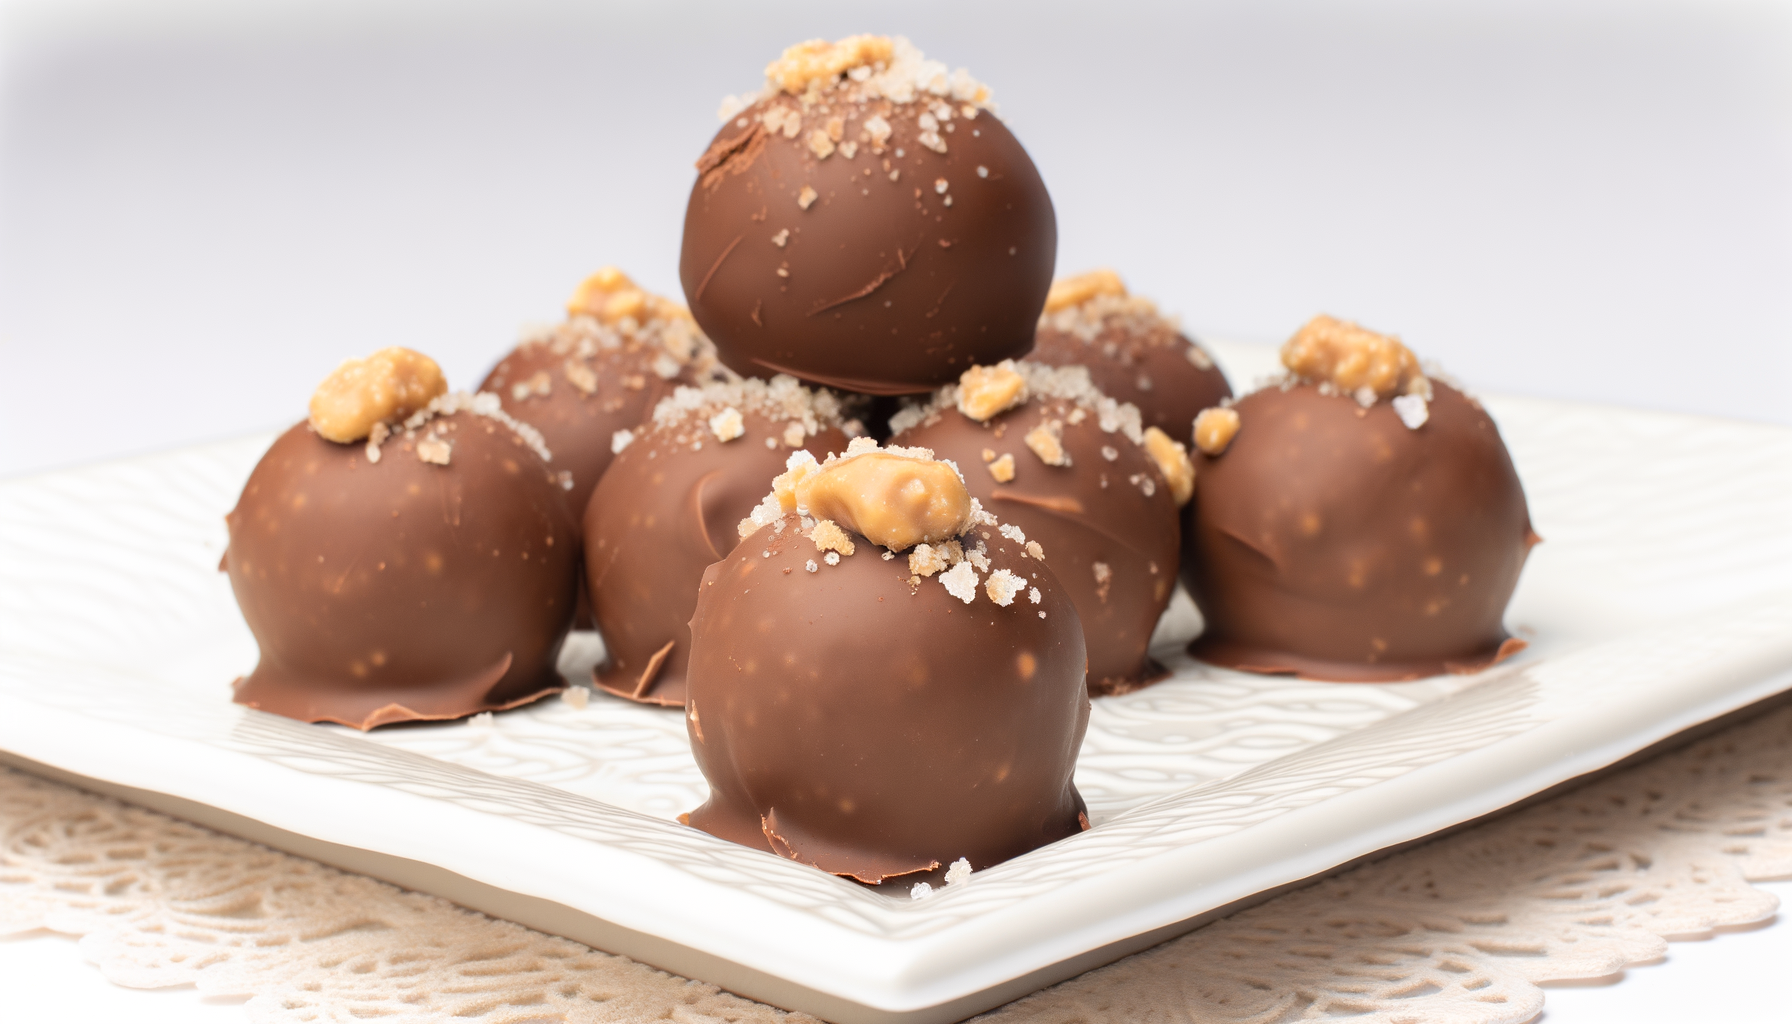 Perfectly round peanut butter balls with chocolate coating and peanut sprinkle on a white lace-patterned platter.